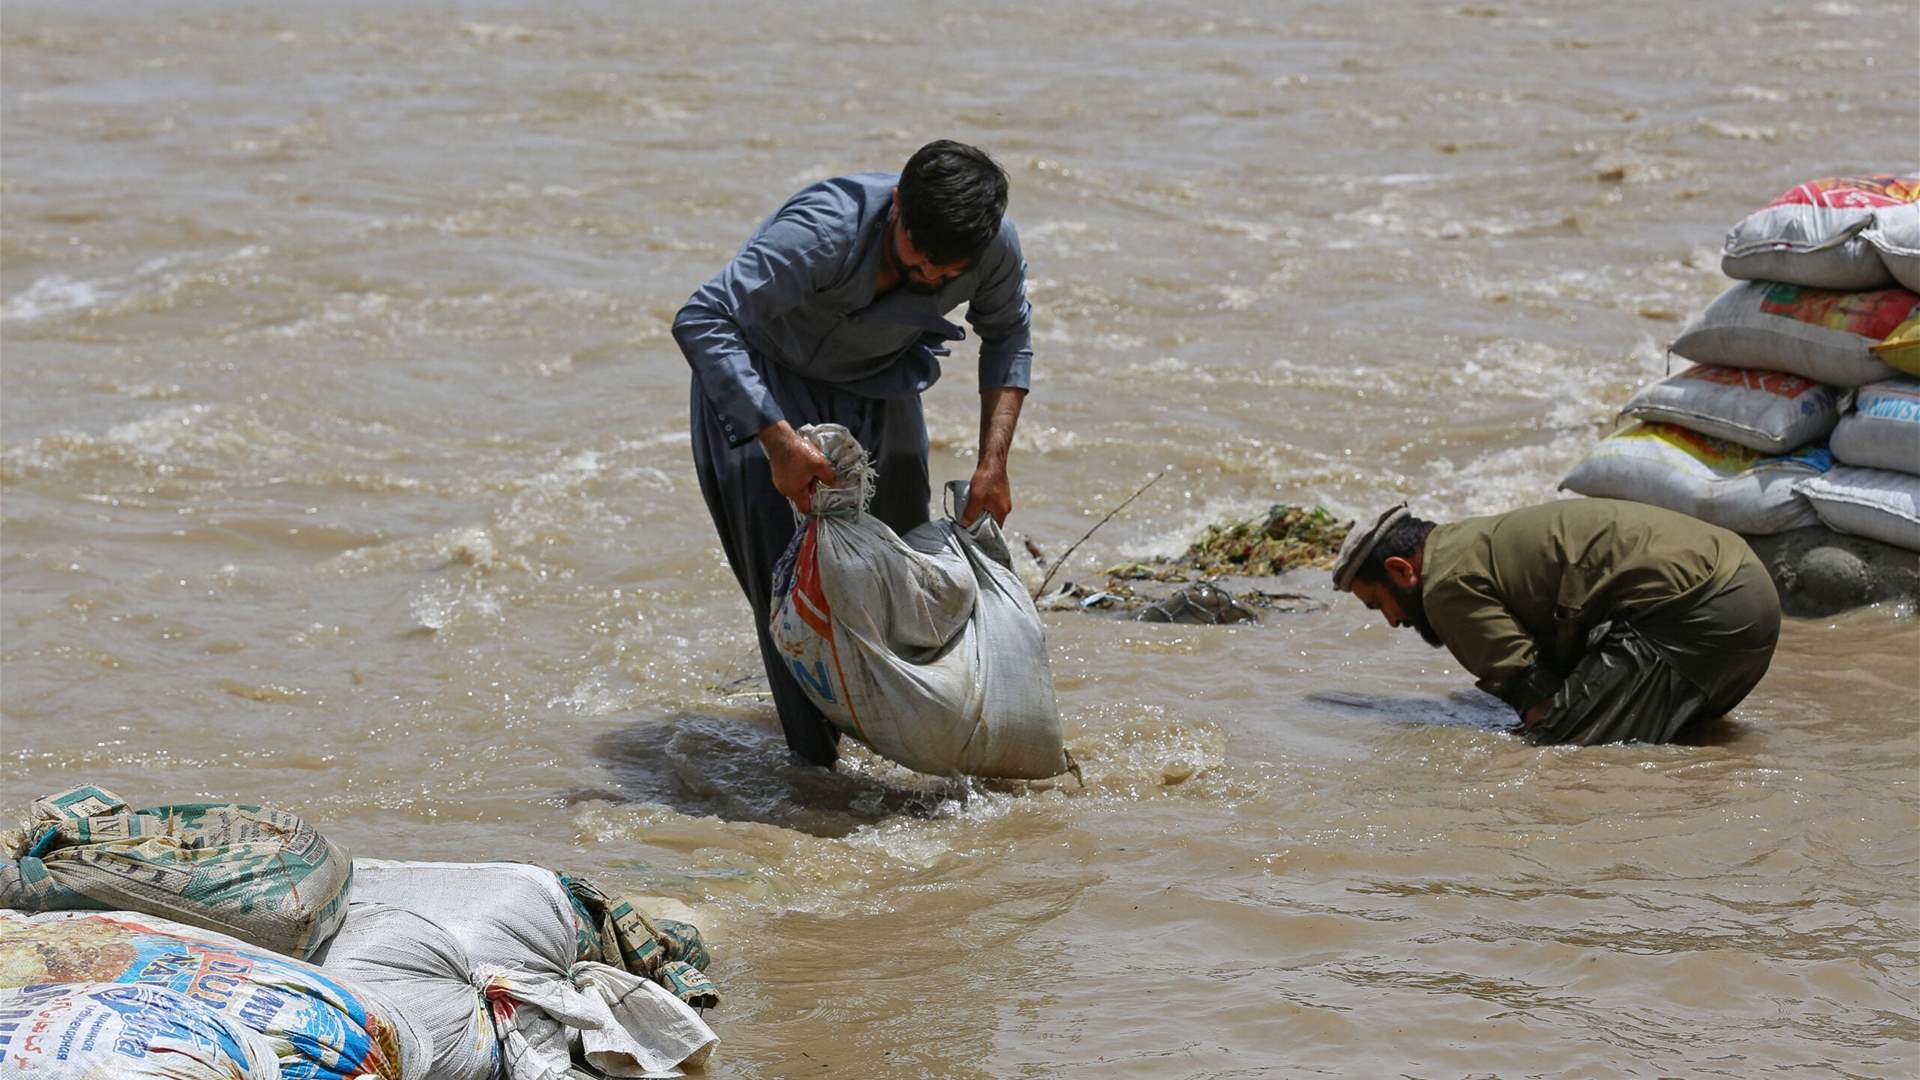 12 dead and 40 missing in flooding caused by heavy rains in Afghanistan